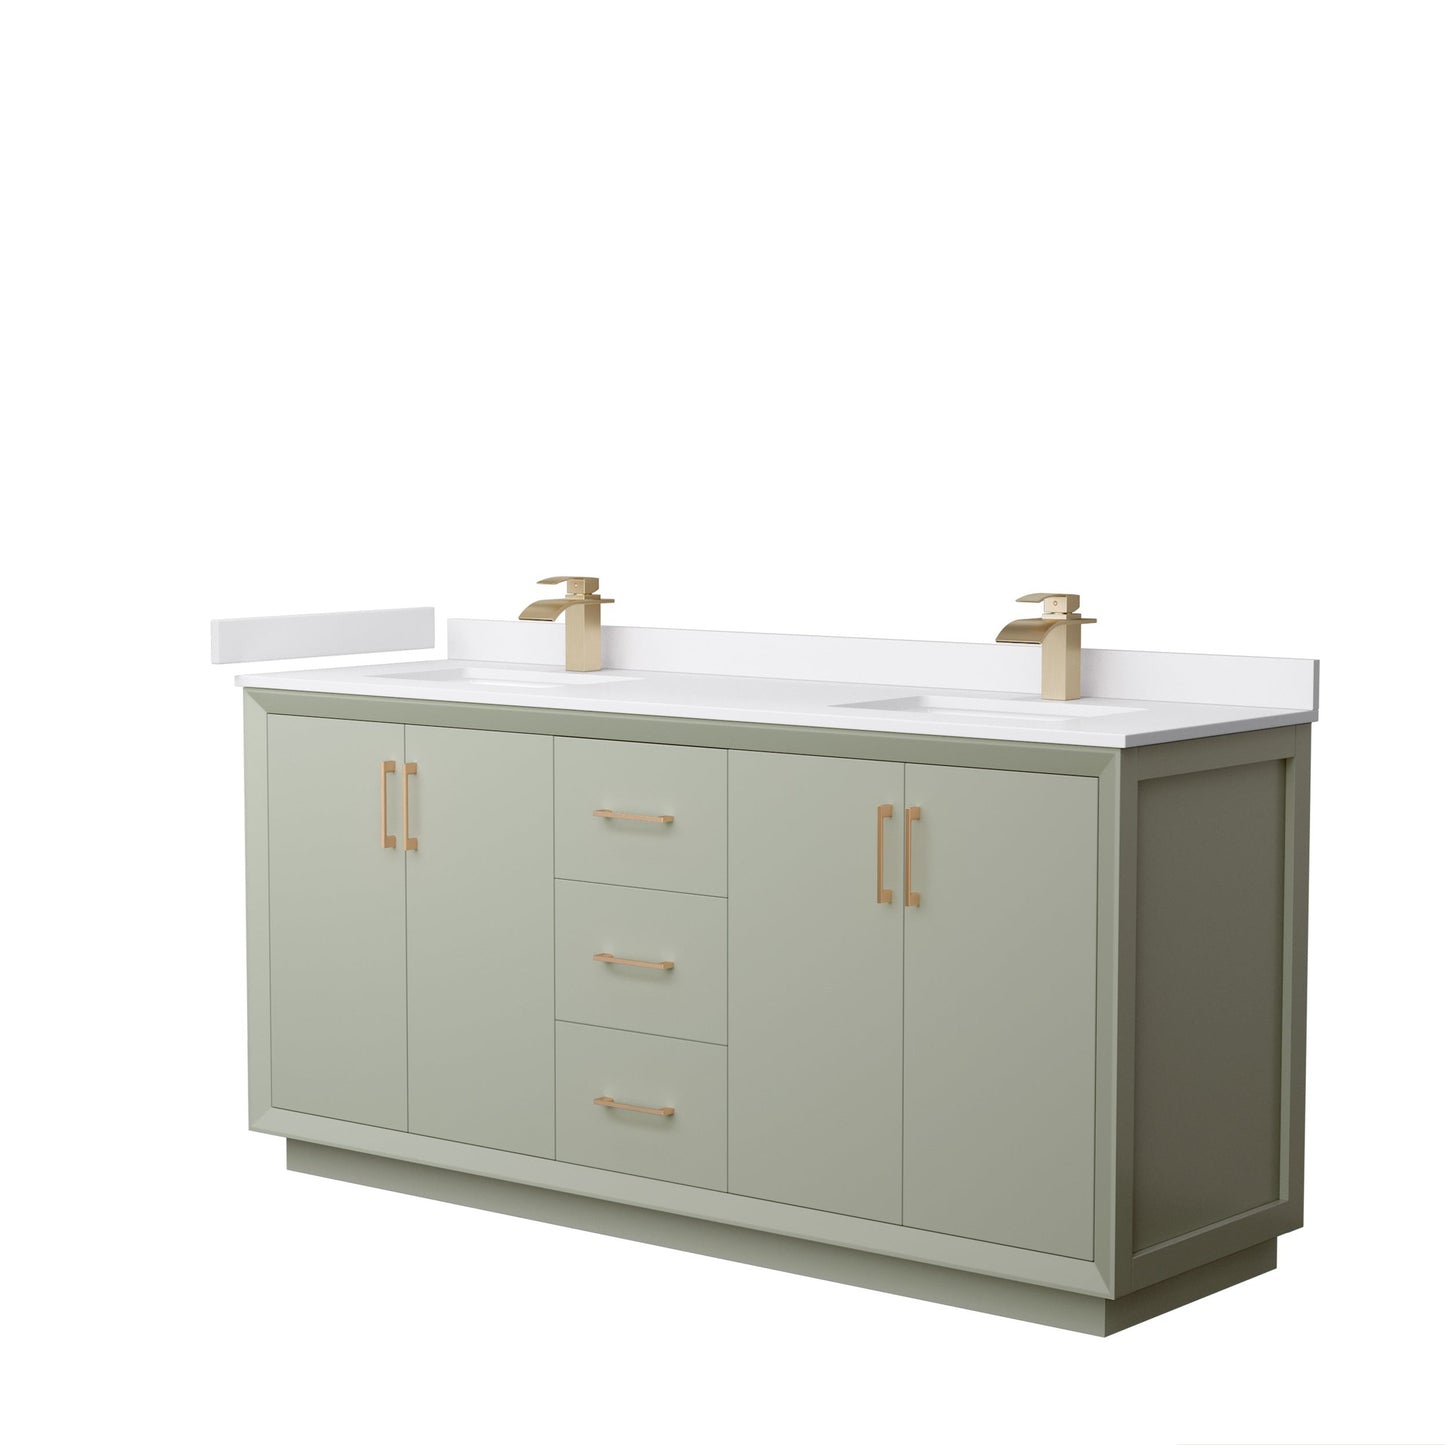 Wyndham Collection Strada 72" Double Bathroom Vanity in Light Green, White Cultured Marble Countertop, Undermount Square Sinks, Satin Bronze Trim